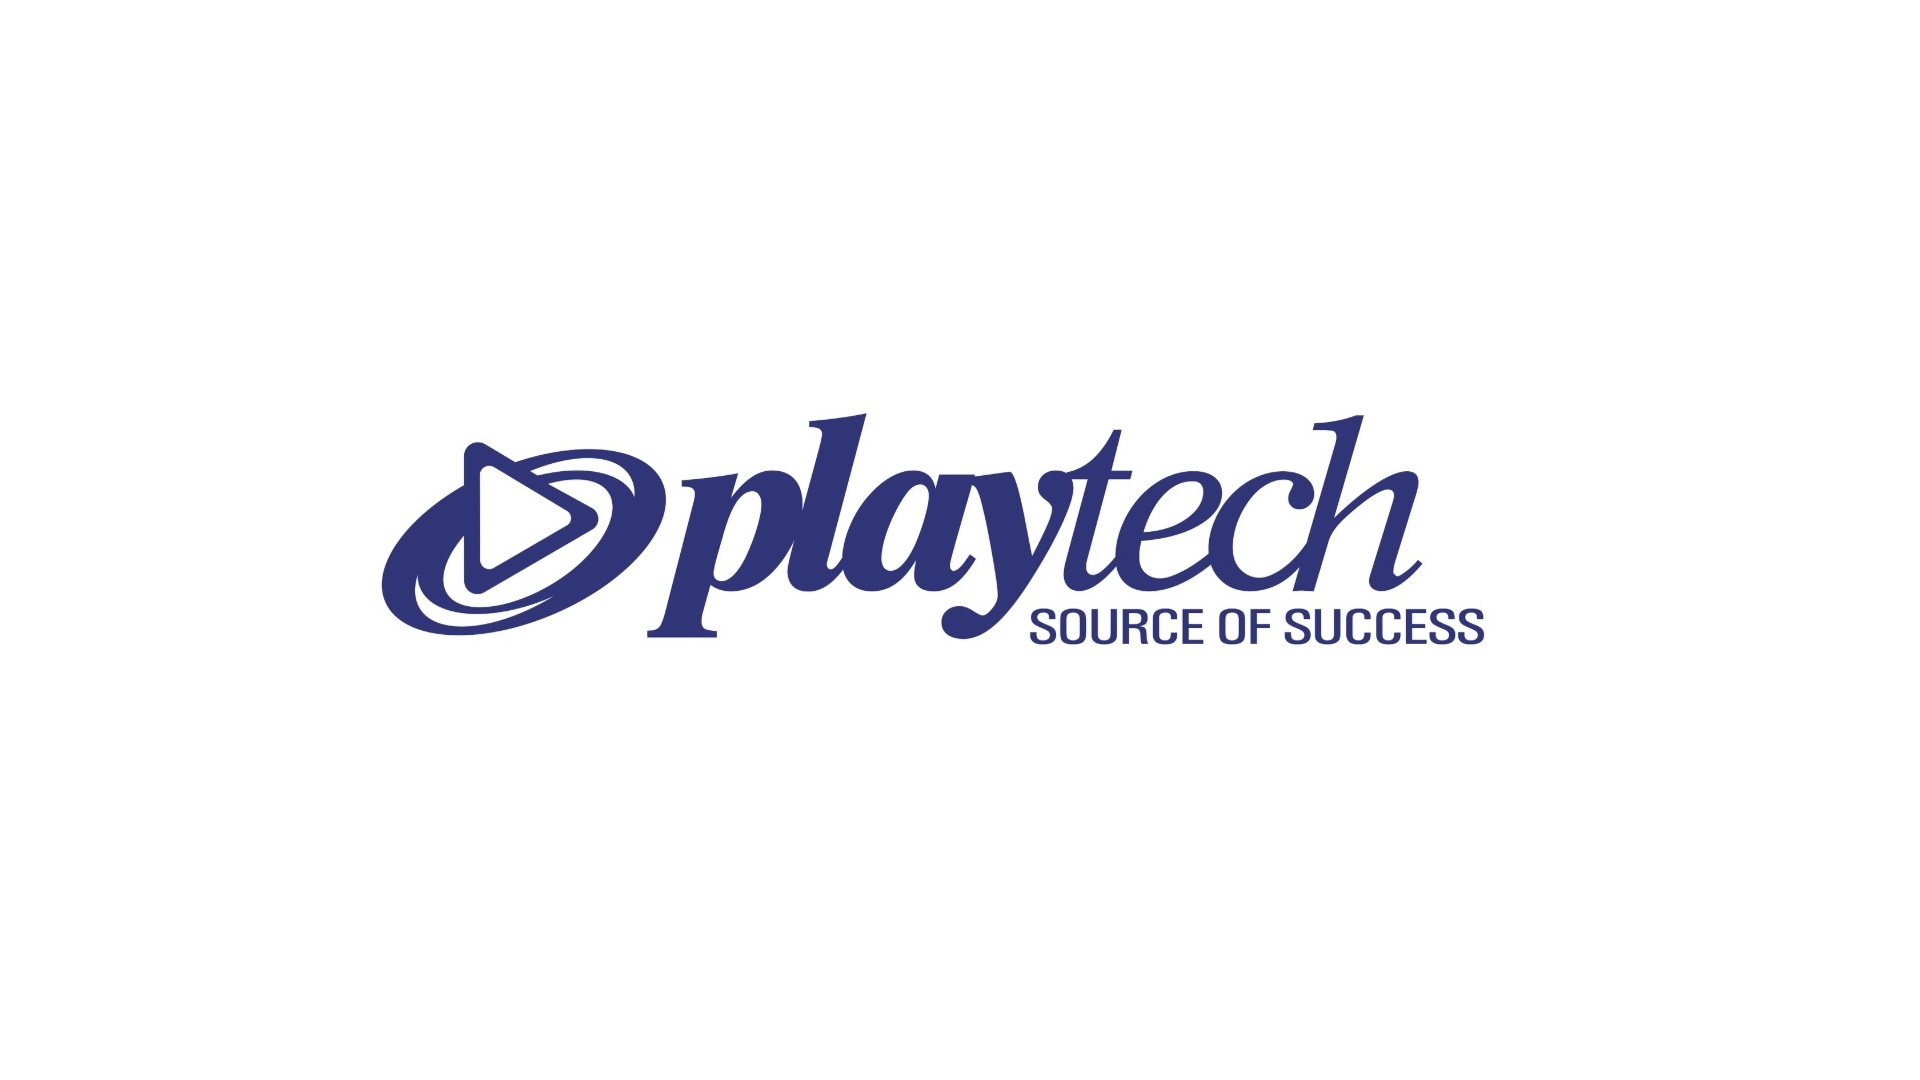 Playtech signs five-year international agreement with The Jockey Club